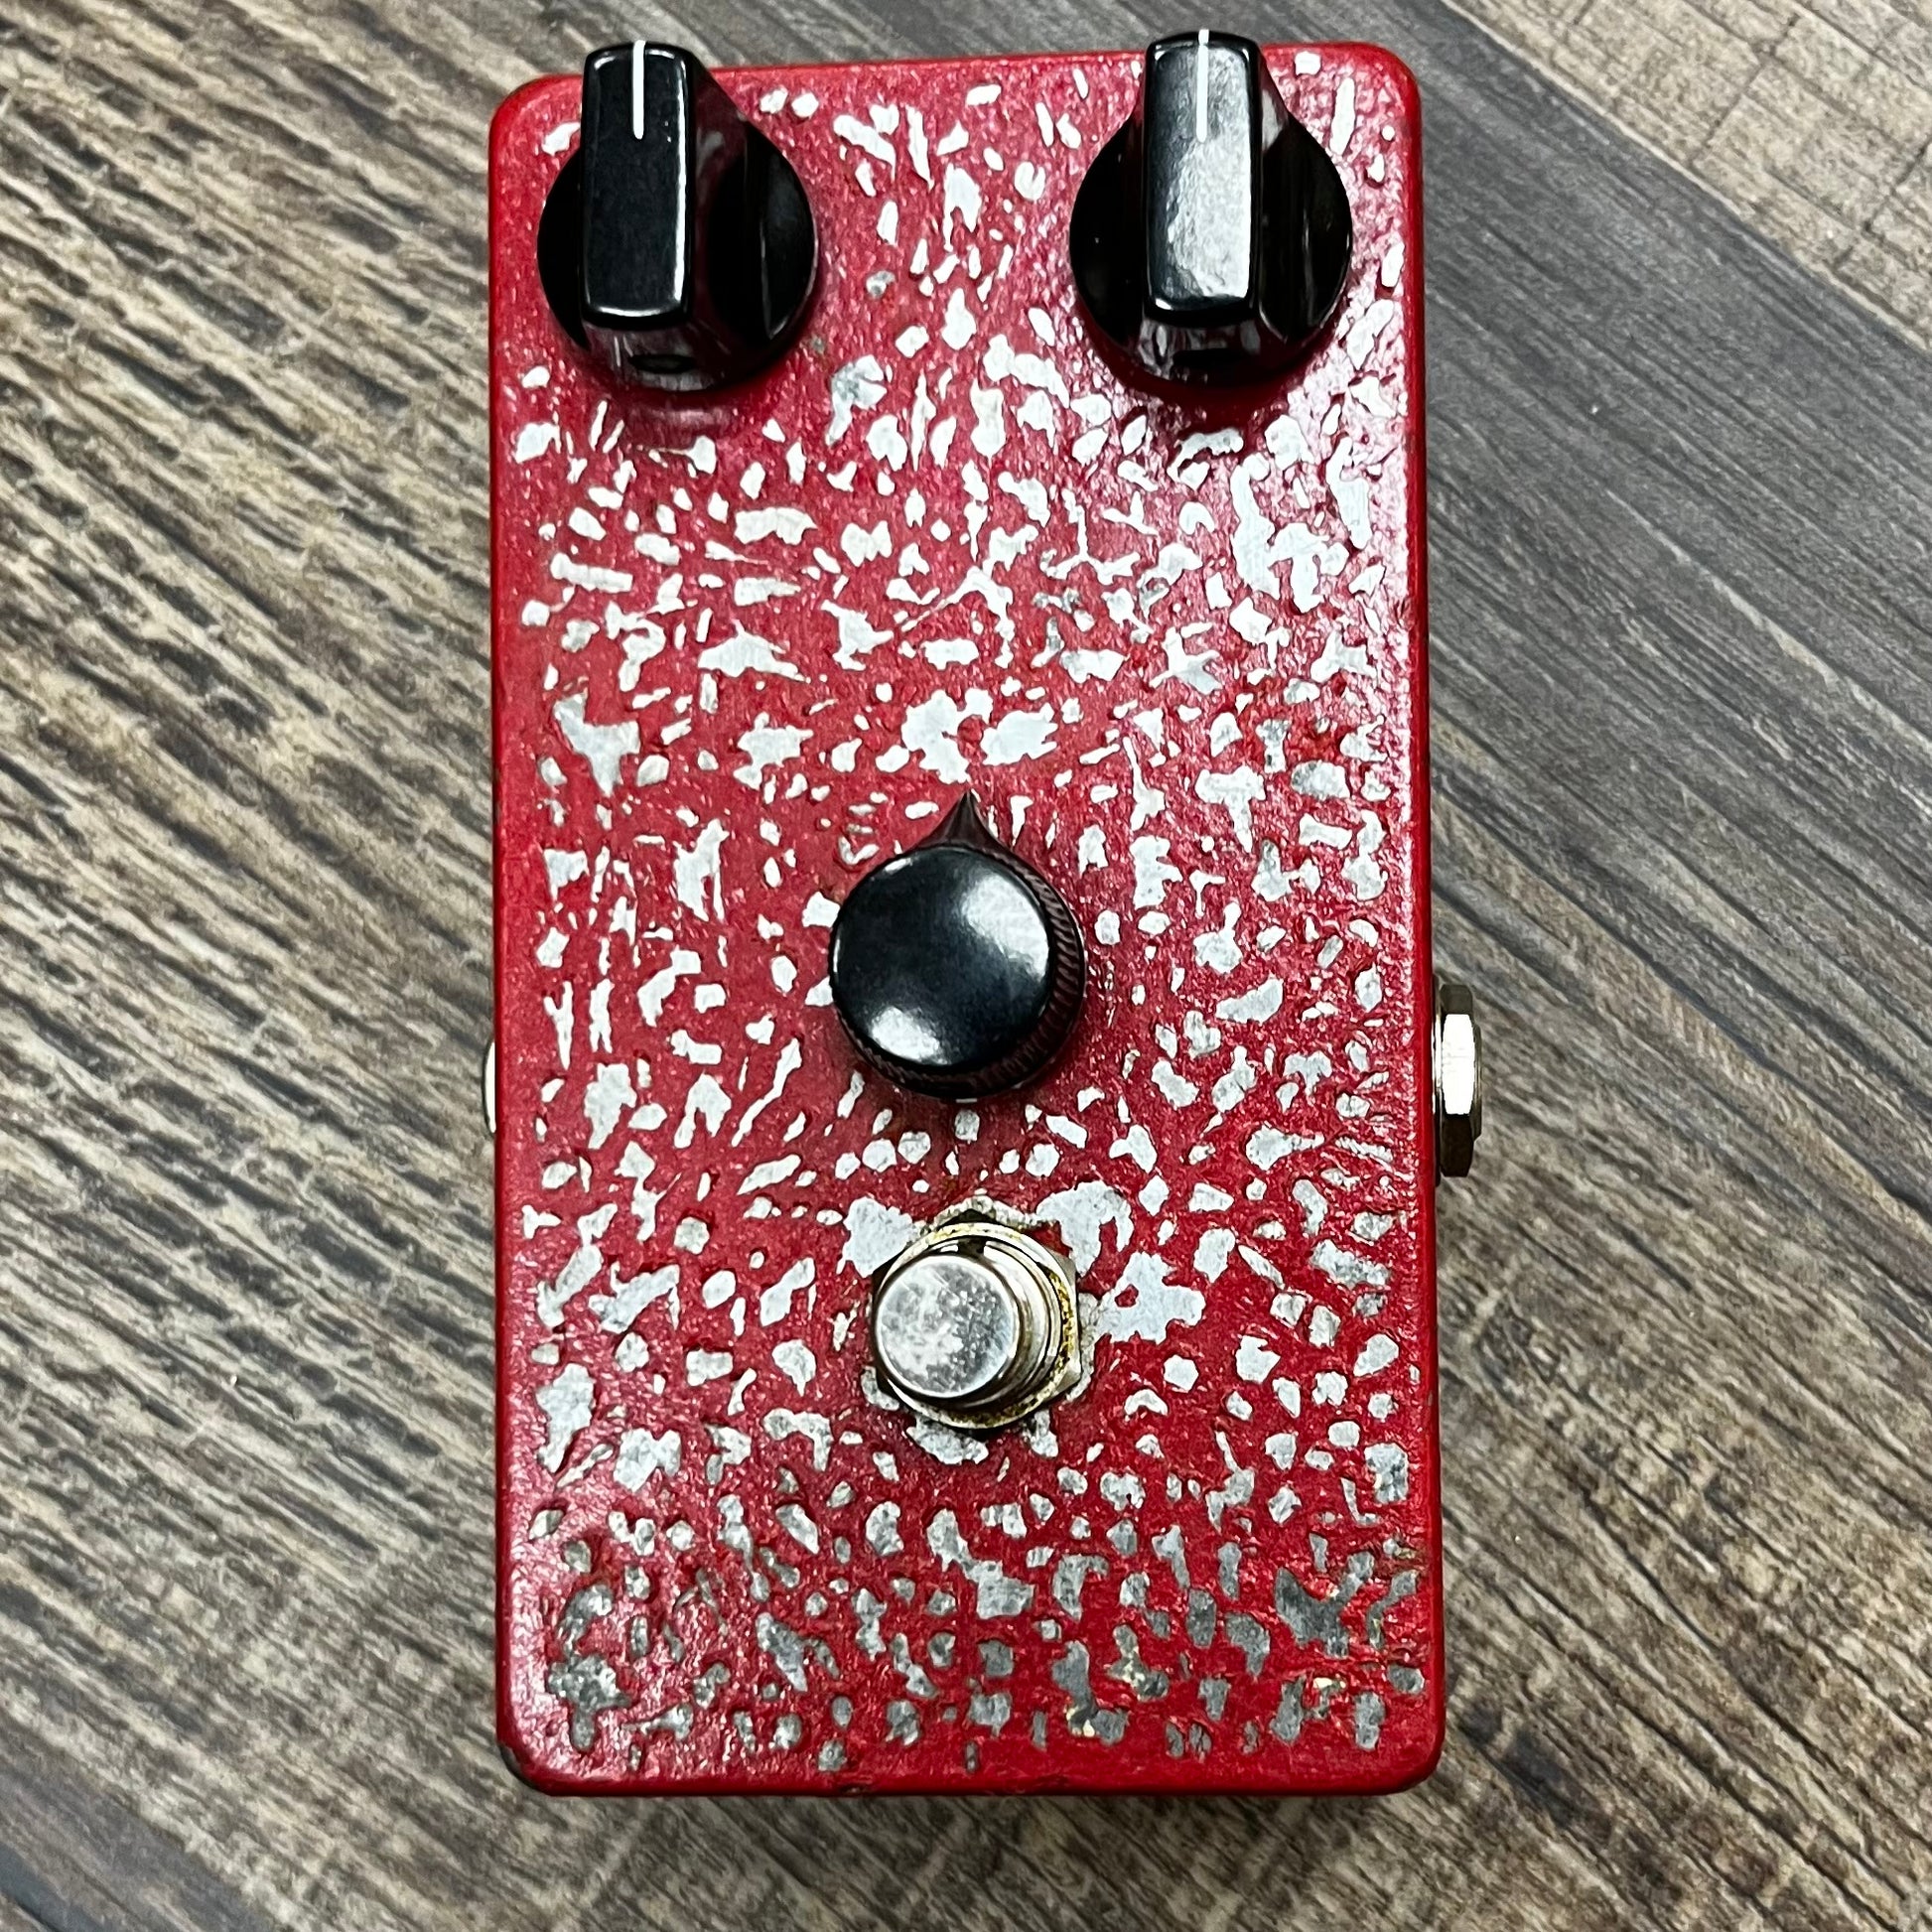 Top of Used Lovepedal Early Fuzz "Ezekiel" TFW311